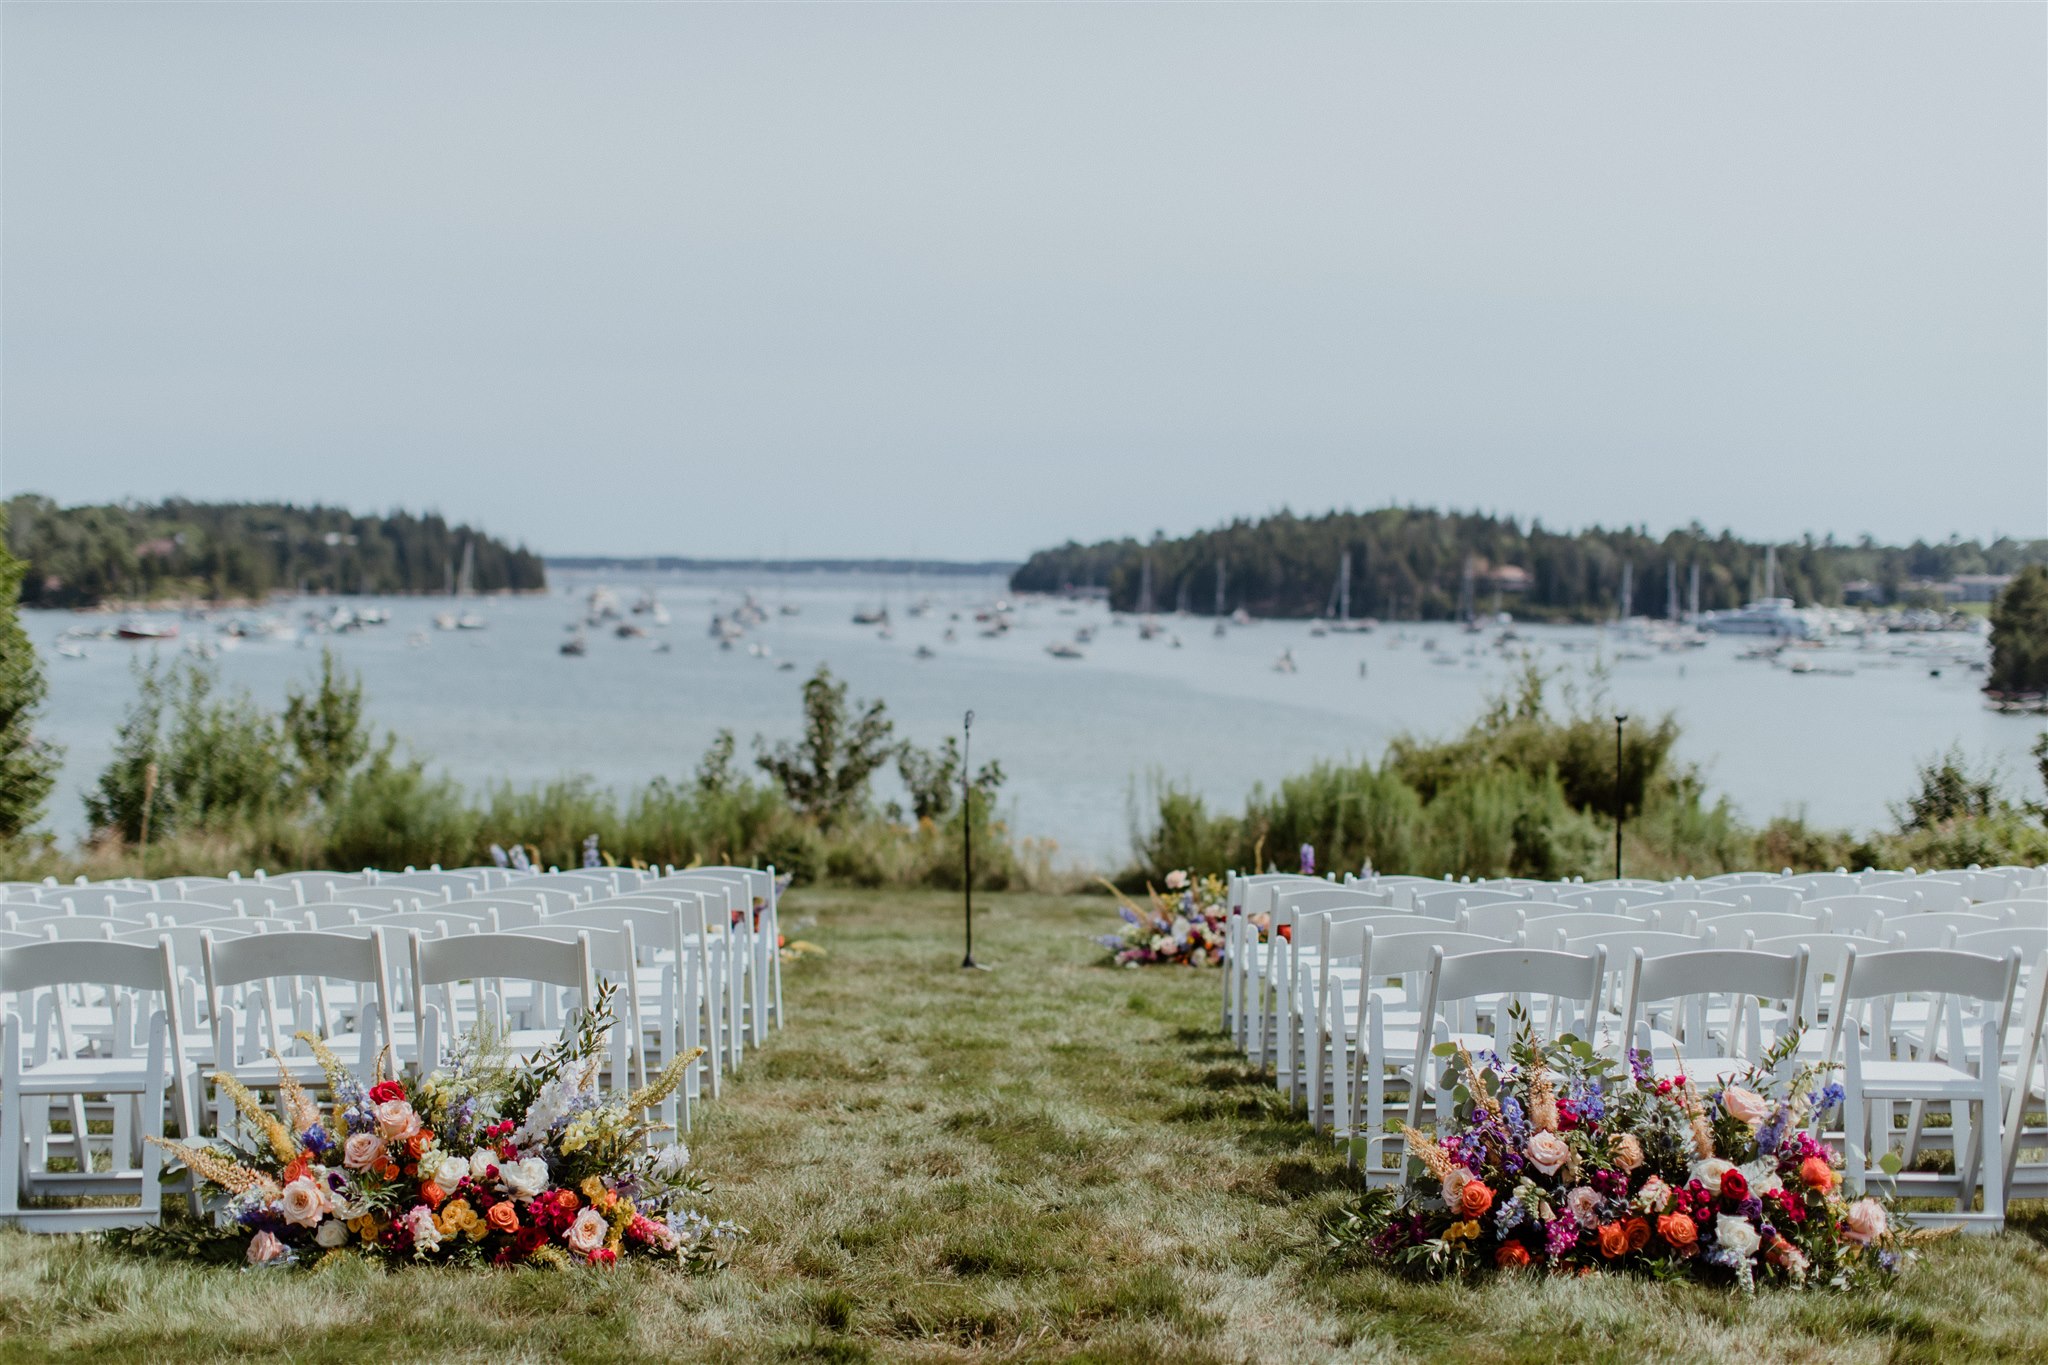 summer maine wedding ceremony site set up and ready for the big day